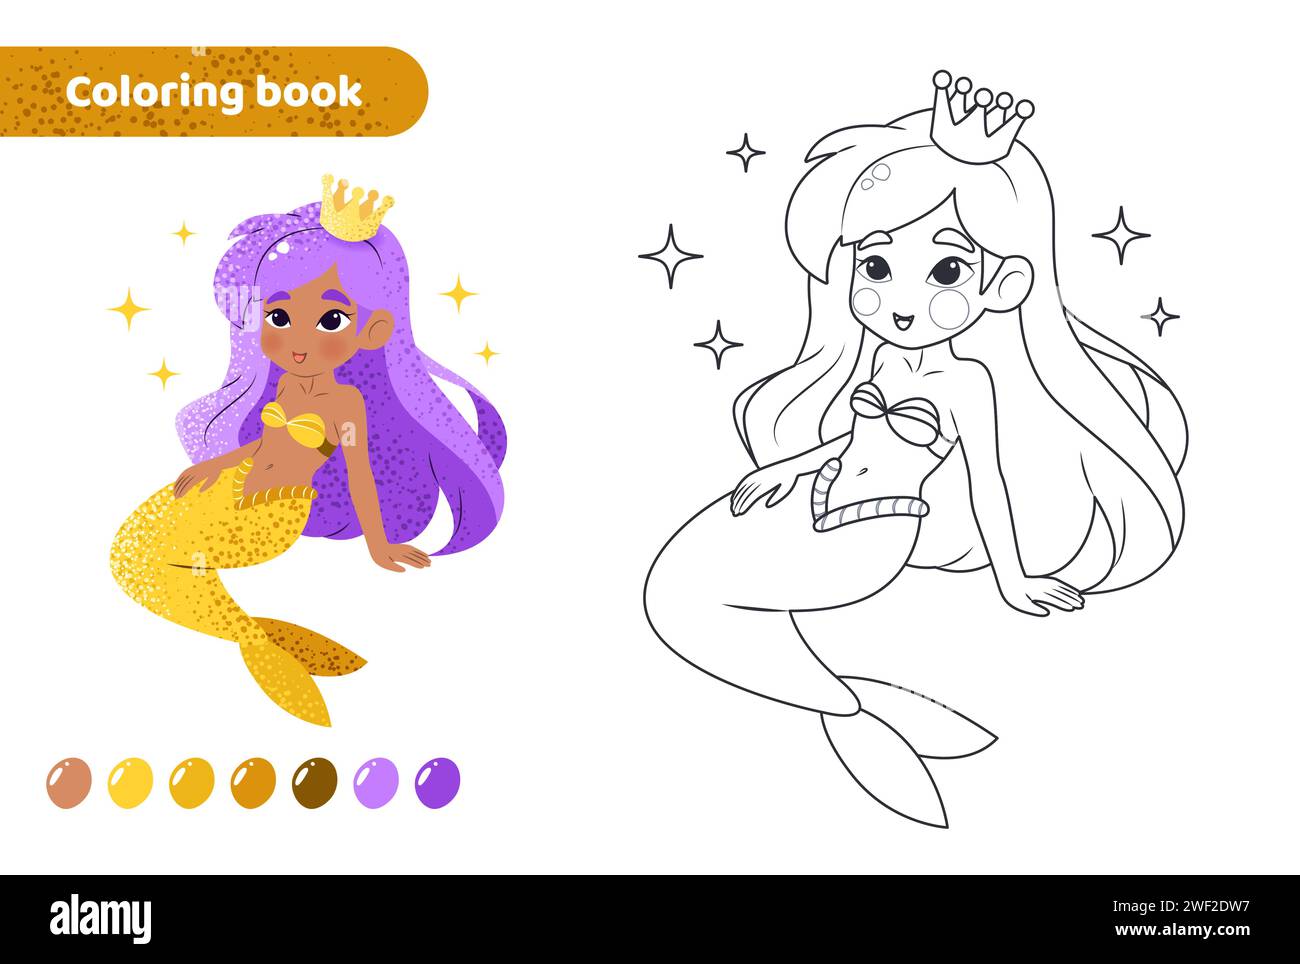 Coloring book for kids. Cute mermaid with stars. Stock Vector